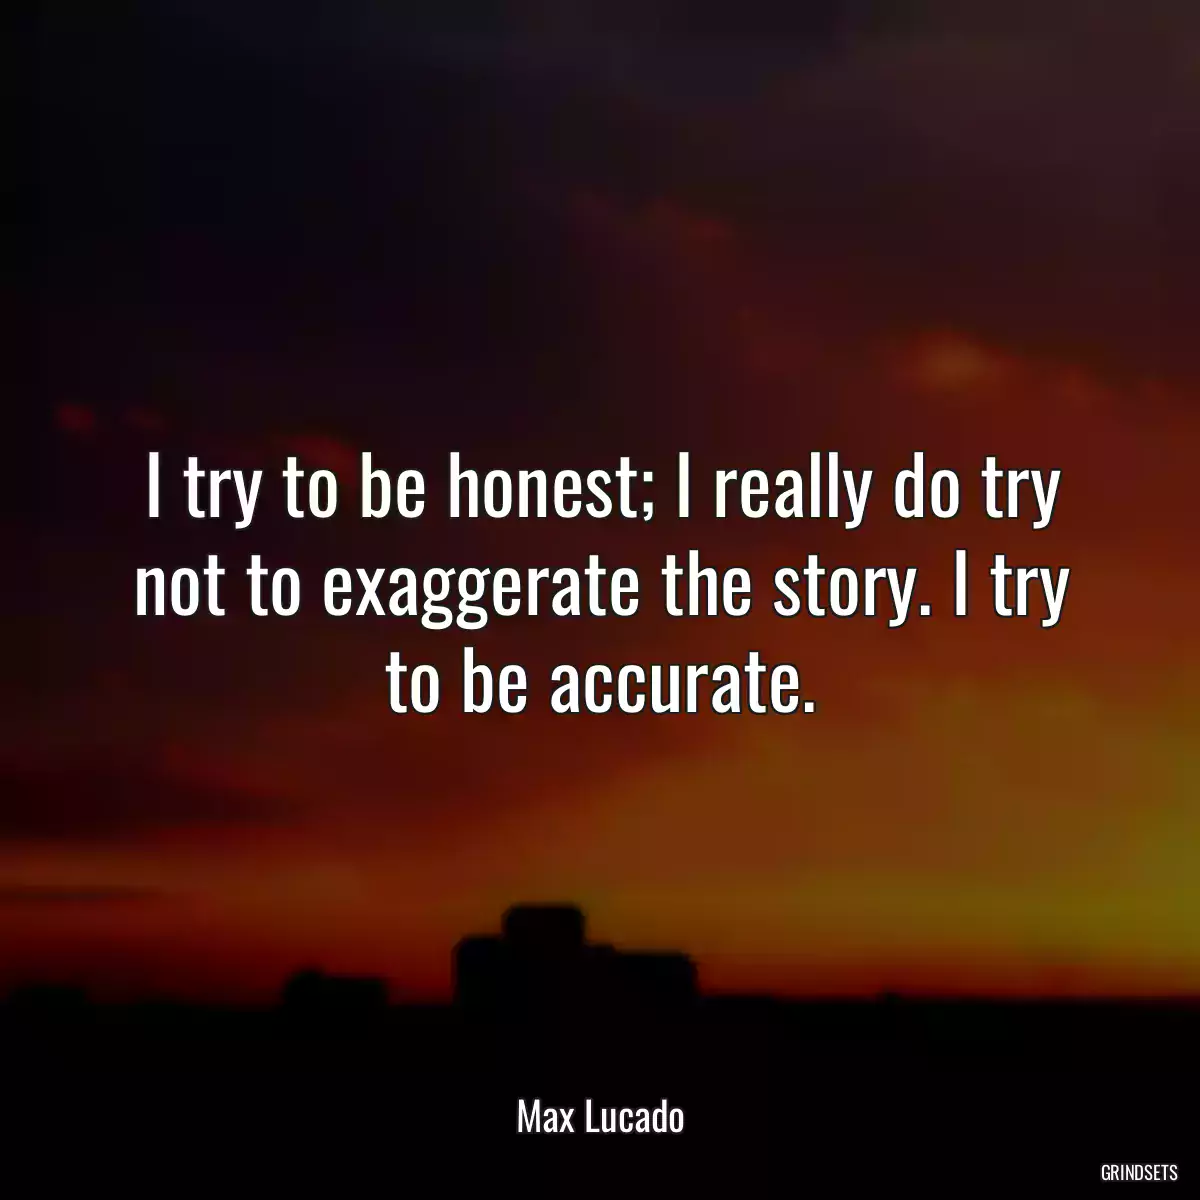 I try to be honest; I really do try not to exaggerate the story. I try to be accurate.